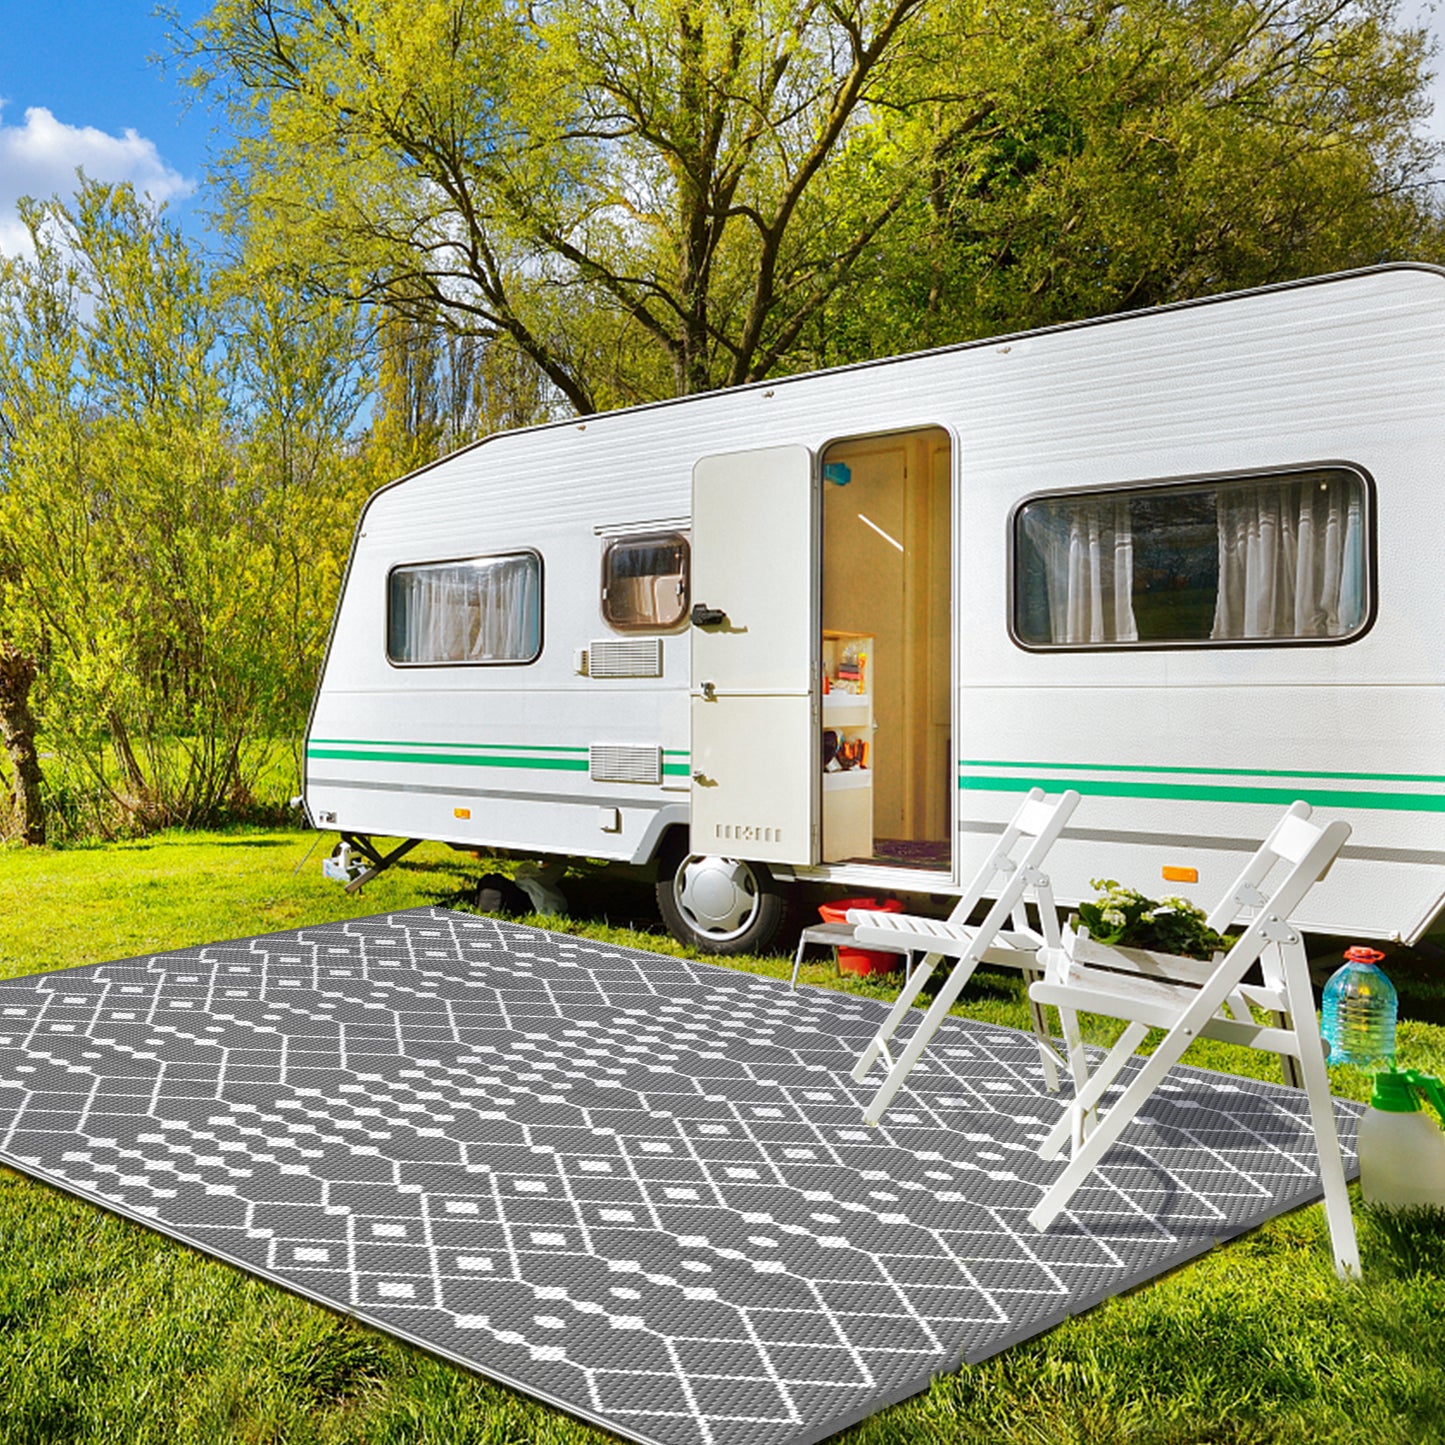 GENIMO Outdoor Rug for Patio Clearance, Waterproof Reversible Outside Carpet for Outdoor Decor, Area Boho Rug, Plastic Straw Mat for RV, Deck, Patio, Camping, Picnic, Porch, Camper